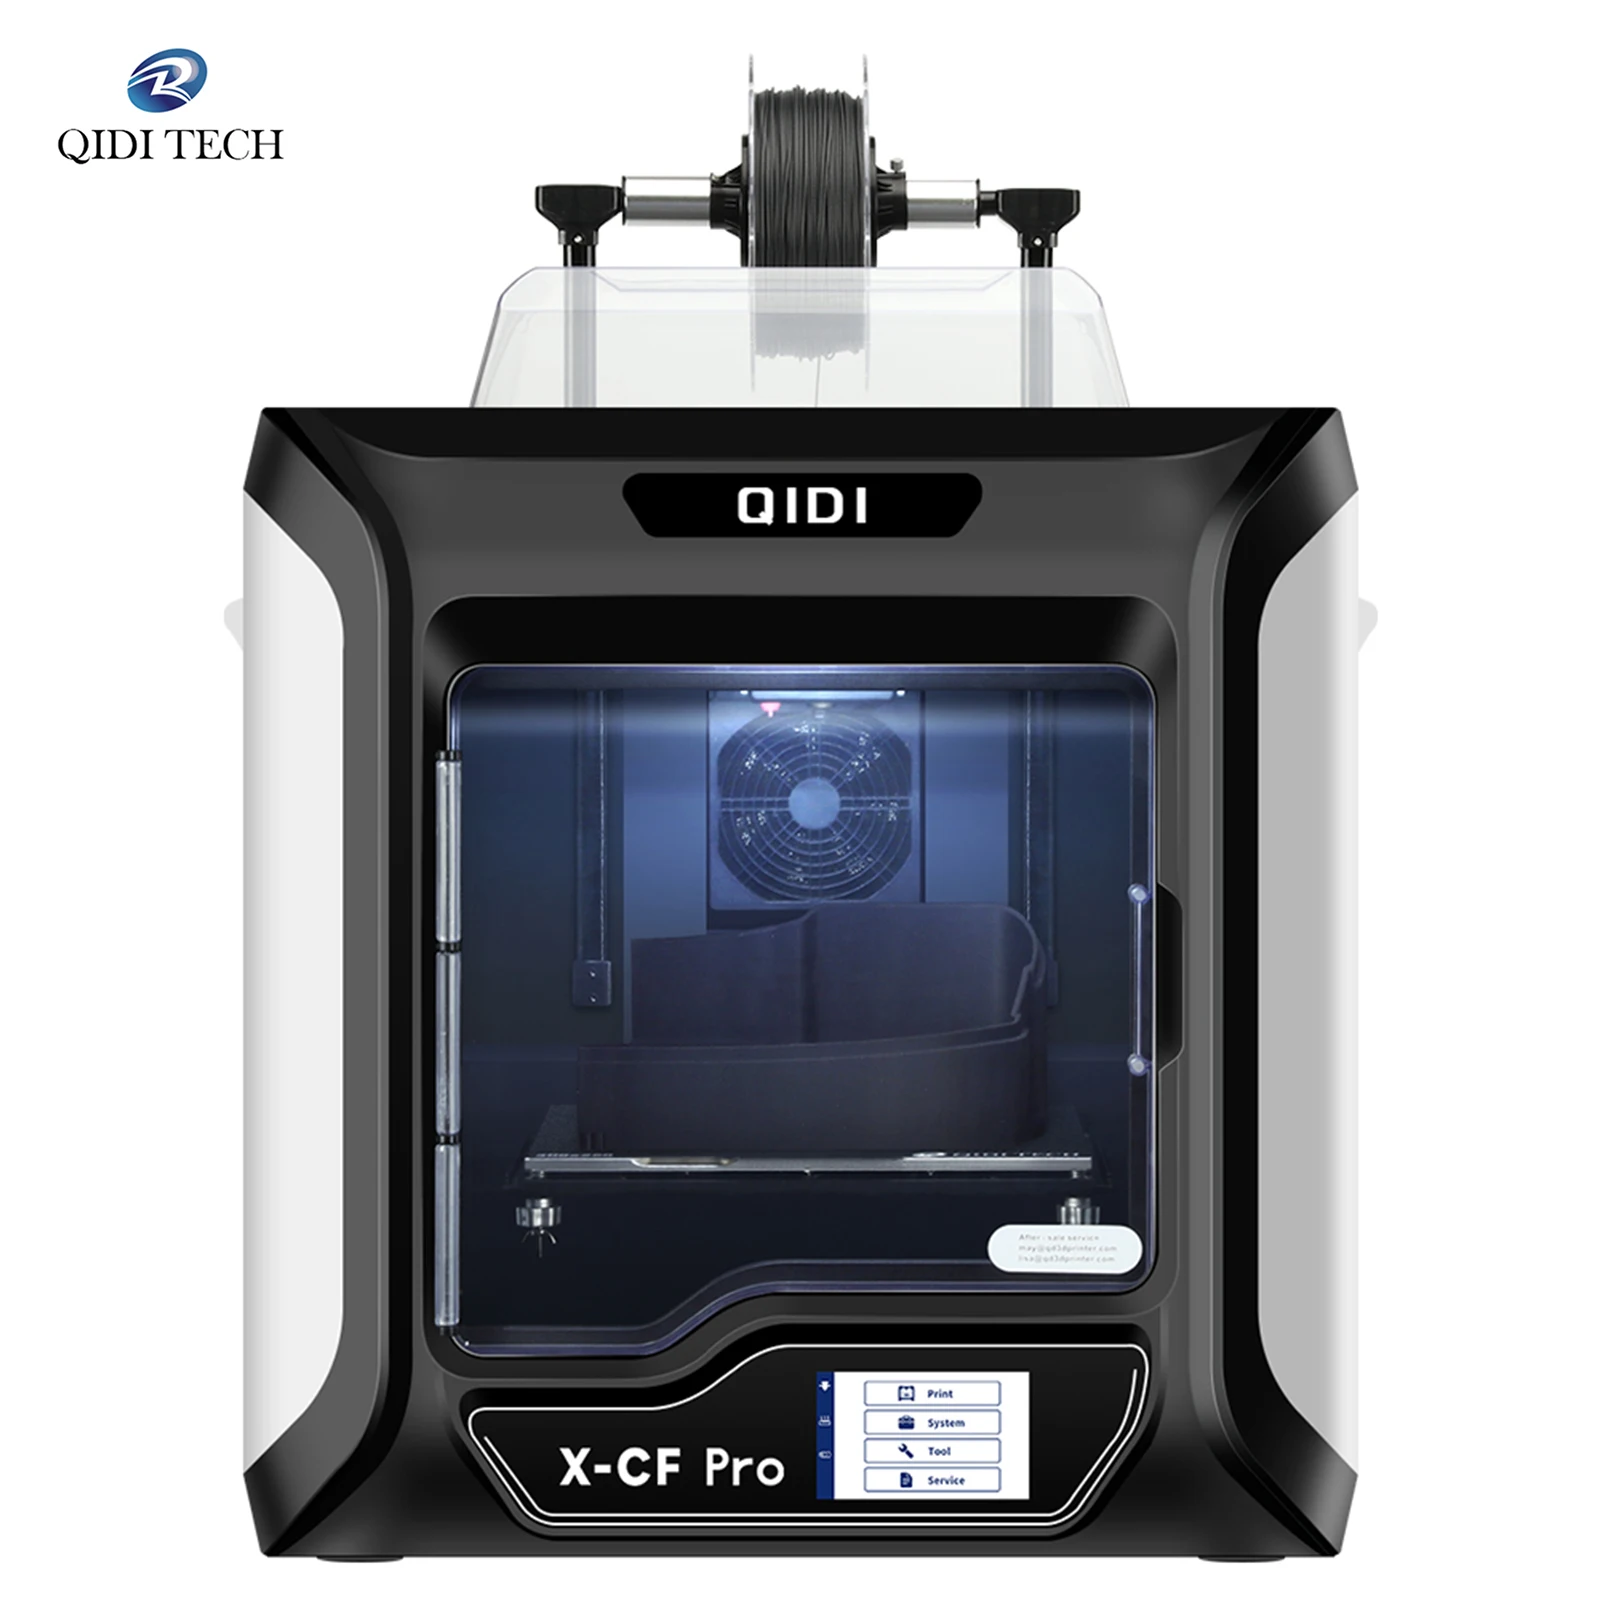 

QIDI TECH X-CF-Pro 3D Printer Desktop Intelligent Industrial Grade with 5inch Touchscreen WiFi Printing Upgraded XYZ Structure